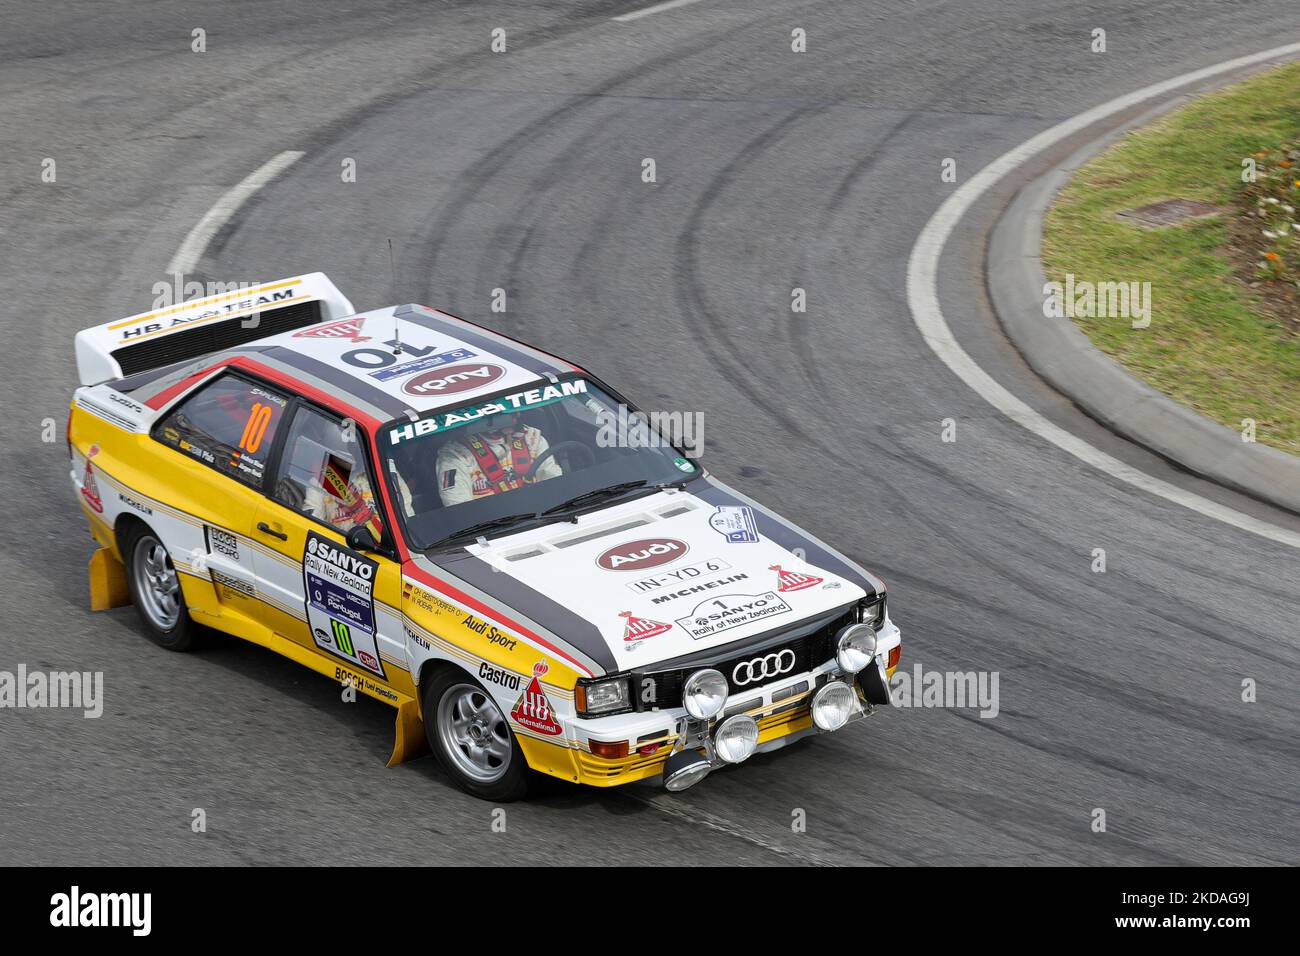 Adam Marsden in Audi Quattro A1 GR:B Original Mikkola/Hertz, Rallye Monte-Carlo 1983 in action during the SS1 Coimbra Street Stage of the WRC Vodafone Rally Portugal 2022 in Matosinhos - Portugal, on May 19, 2022. (Photo by Paulo Oliveira / NurPhoto) Stock Photo